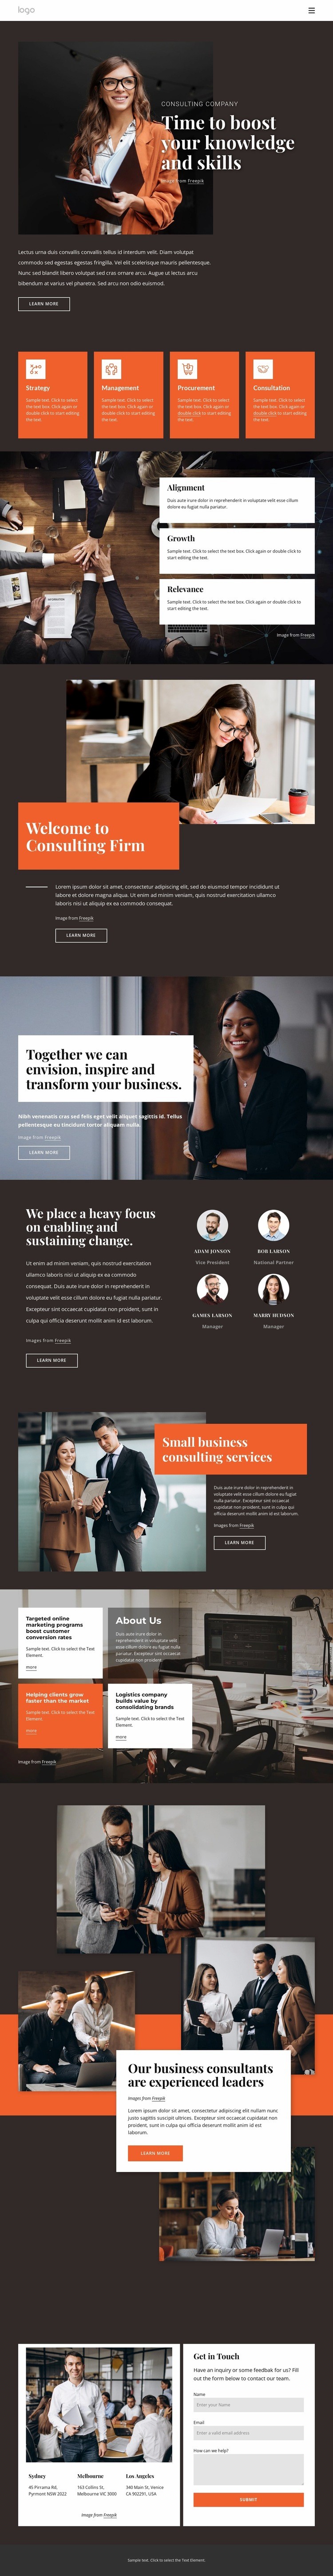 Рlan out your learning journey Squarespace Template Alternative